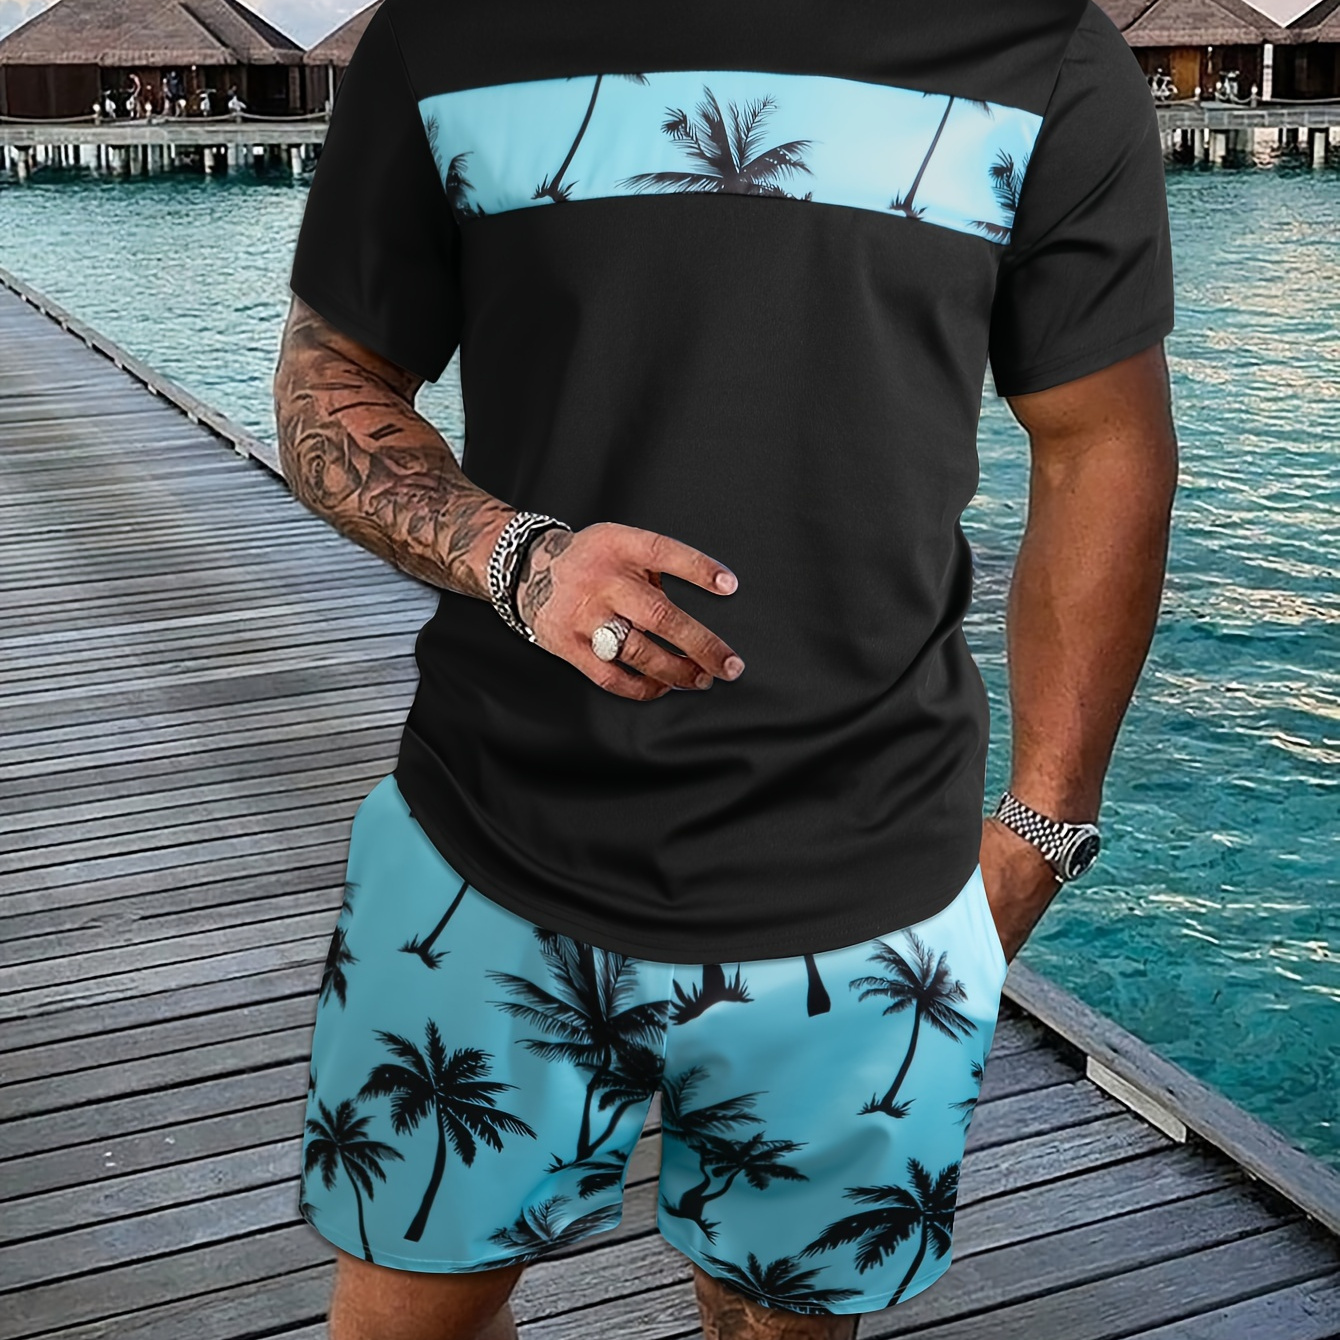 

Tropical Coconut Tree Print, Men's 2pcs Outfits, Casual Crew Neck Short Sleeve T-shirt And Drawstring Shorts Set For Summer, Men's Clothing Loungewear Vacation Resorts